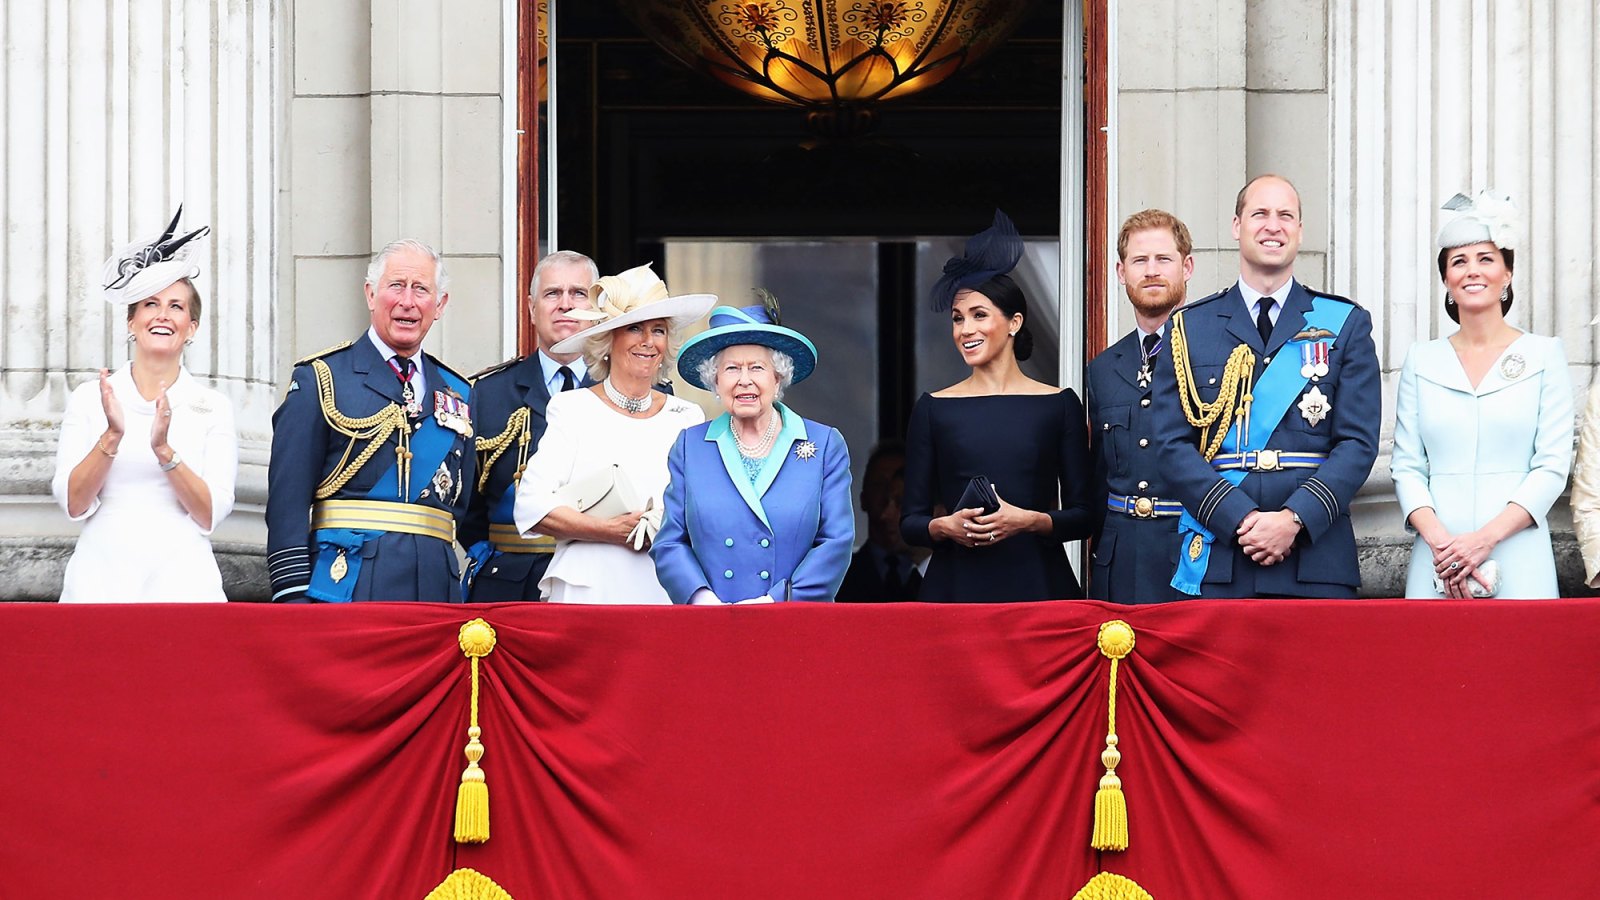 Prince Charles, Prince of Wales, Prince Andrew, Duke of York, Camilla, Duchess of Cornwall, Queen Elizabeth II, Meghan, Duchess of Sussex, Prince Harry, Duke of Sussex, Prince William, Duke of Cambridge and Catherine, Duchess of Cambridge